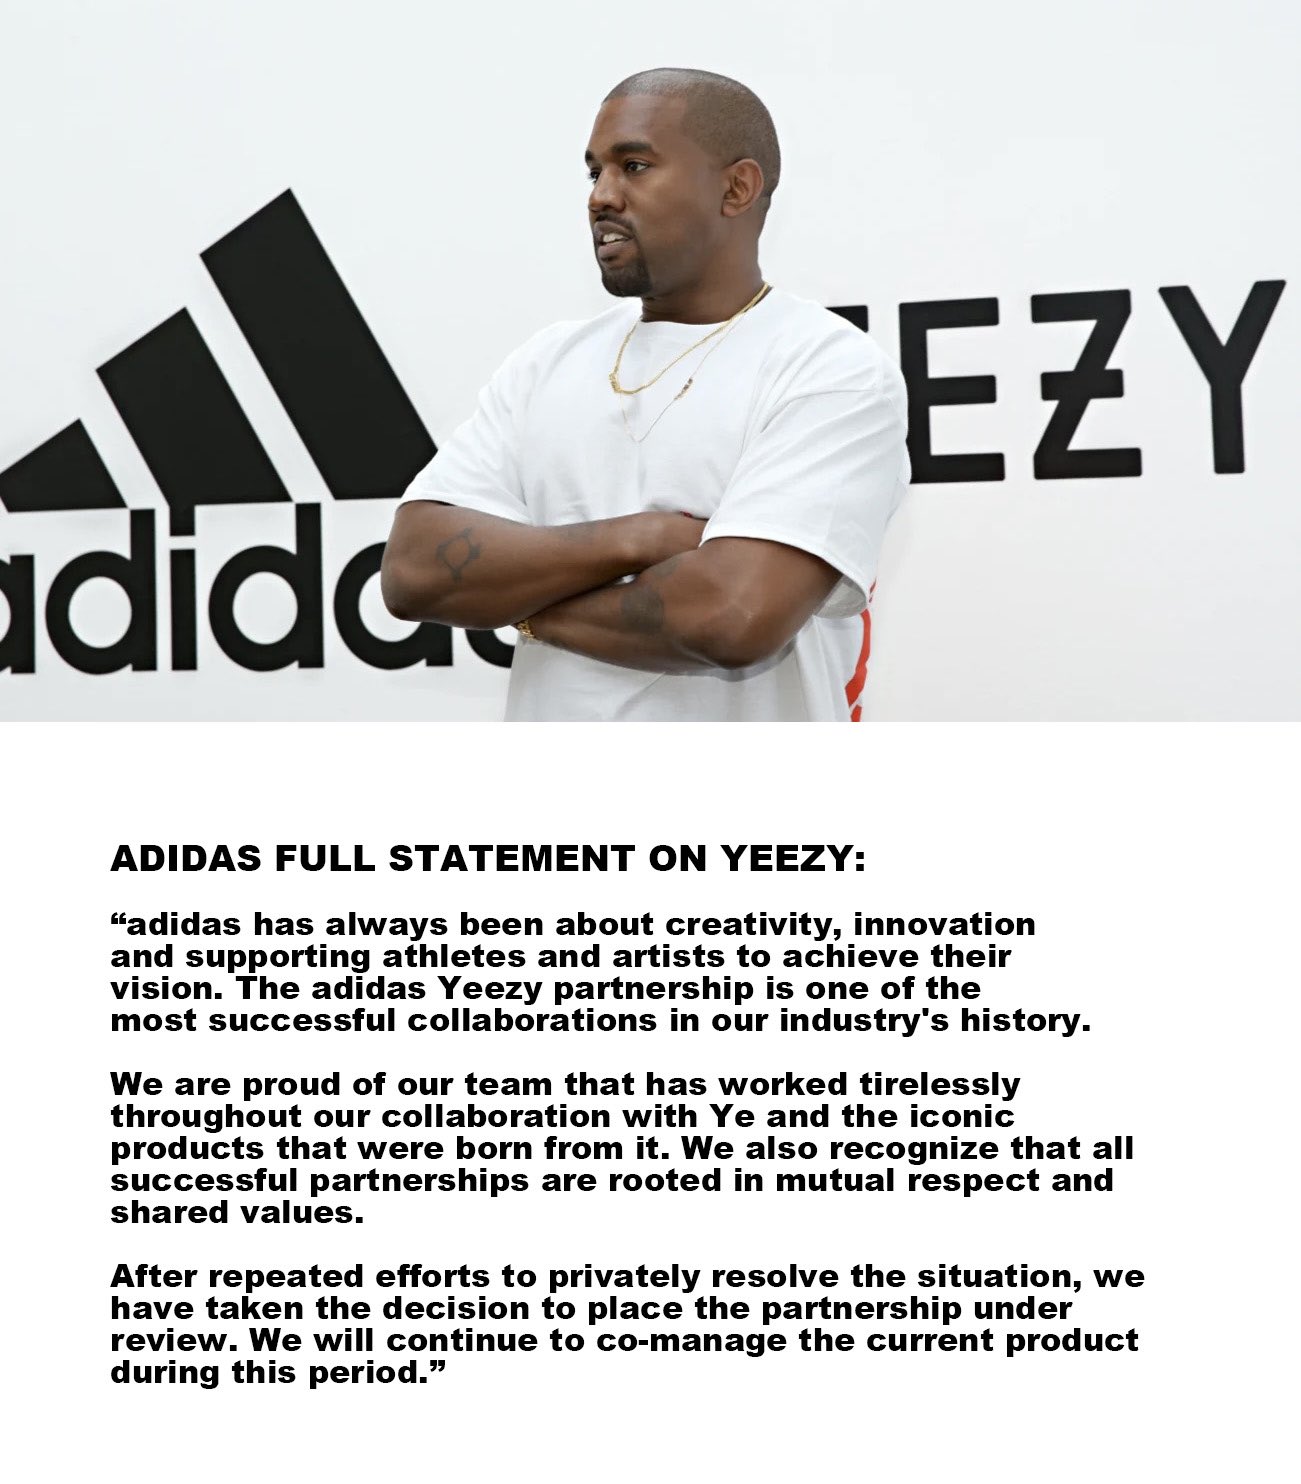 Nick DePaula on Twitter: "BREAKING: Adidas says Kanye West's Yeezy category is *under review* “After repeated efforts privately resolve the situation, we have taken the decision to place the partnership under